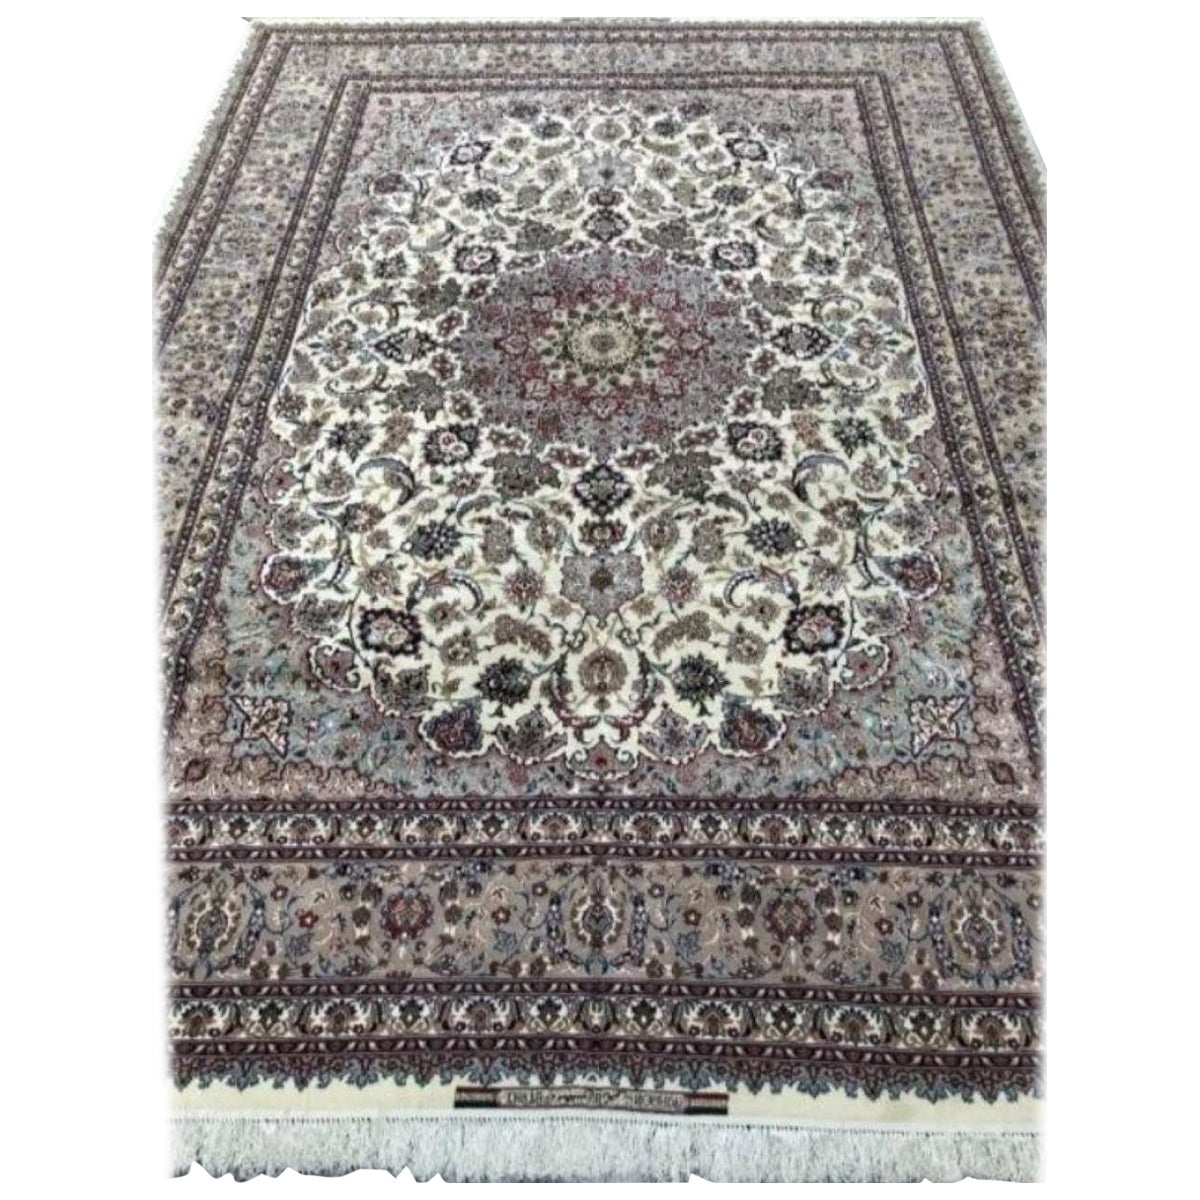 Magnificent Persian silk and wool pile with silk foundation. This rug has approximately 700 knots per sq inch with a total of 13,000,000 knots tied by hand one by one. It took 7 years to complete this beautiful piece of art. The signature reads: